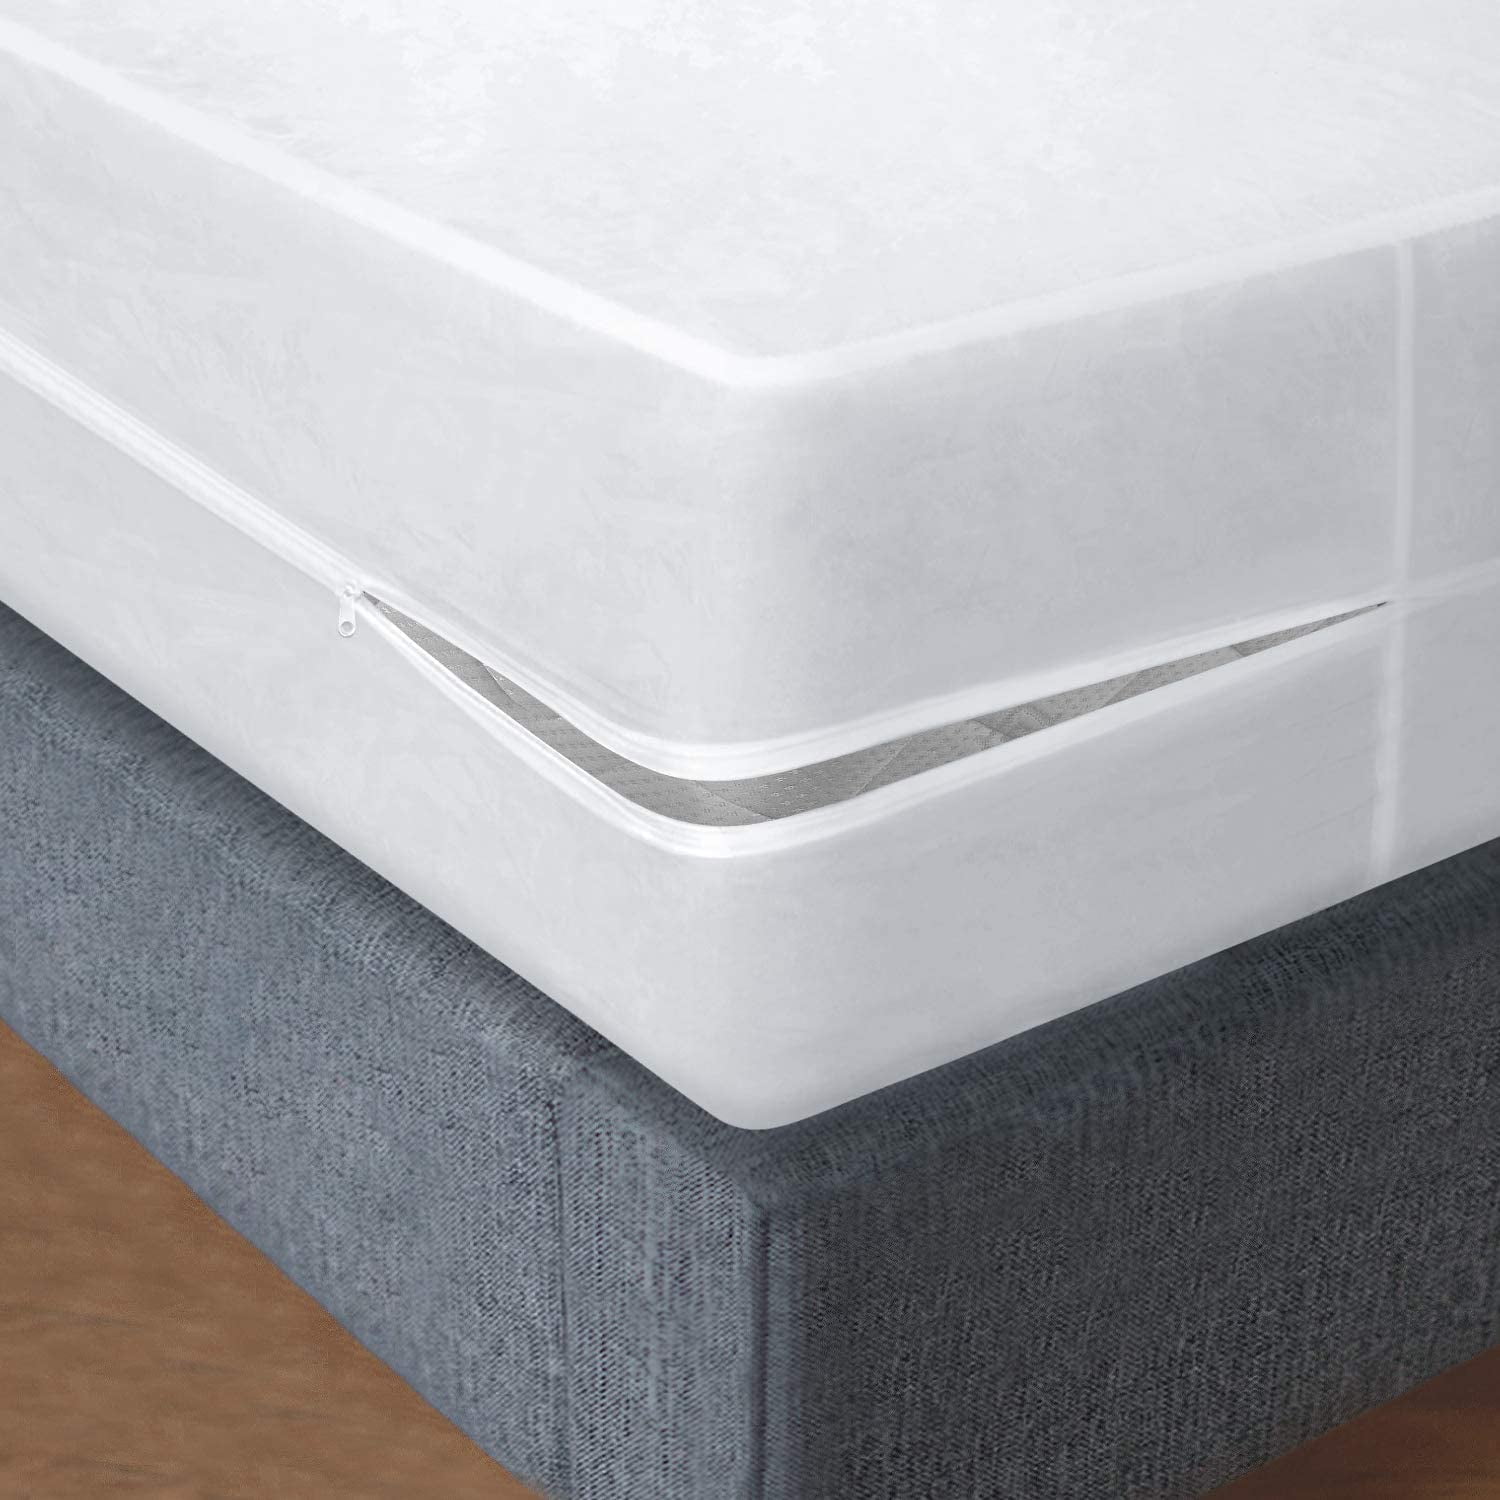 --PLASTIC MATTRESS SOFT VINYL COVER----COMES IN ALL SIZES DUST FREE PROTECTION 